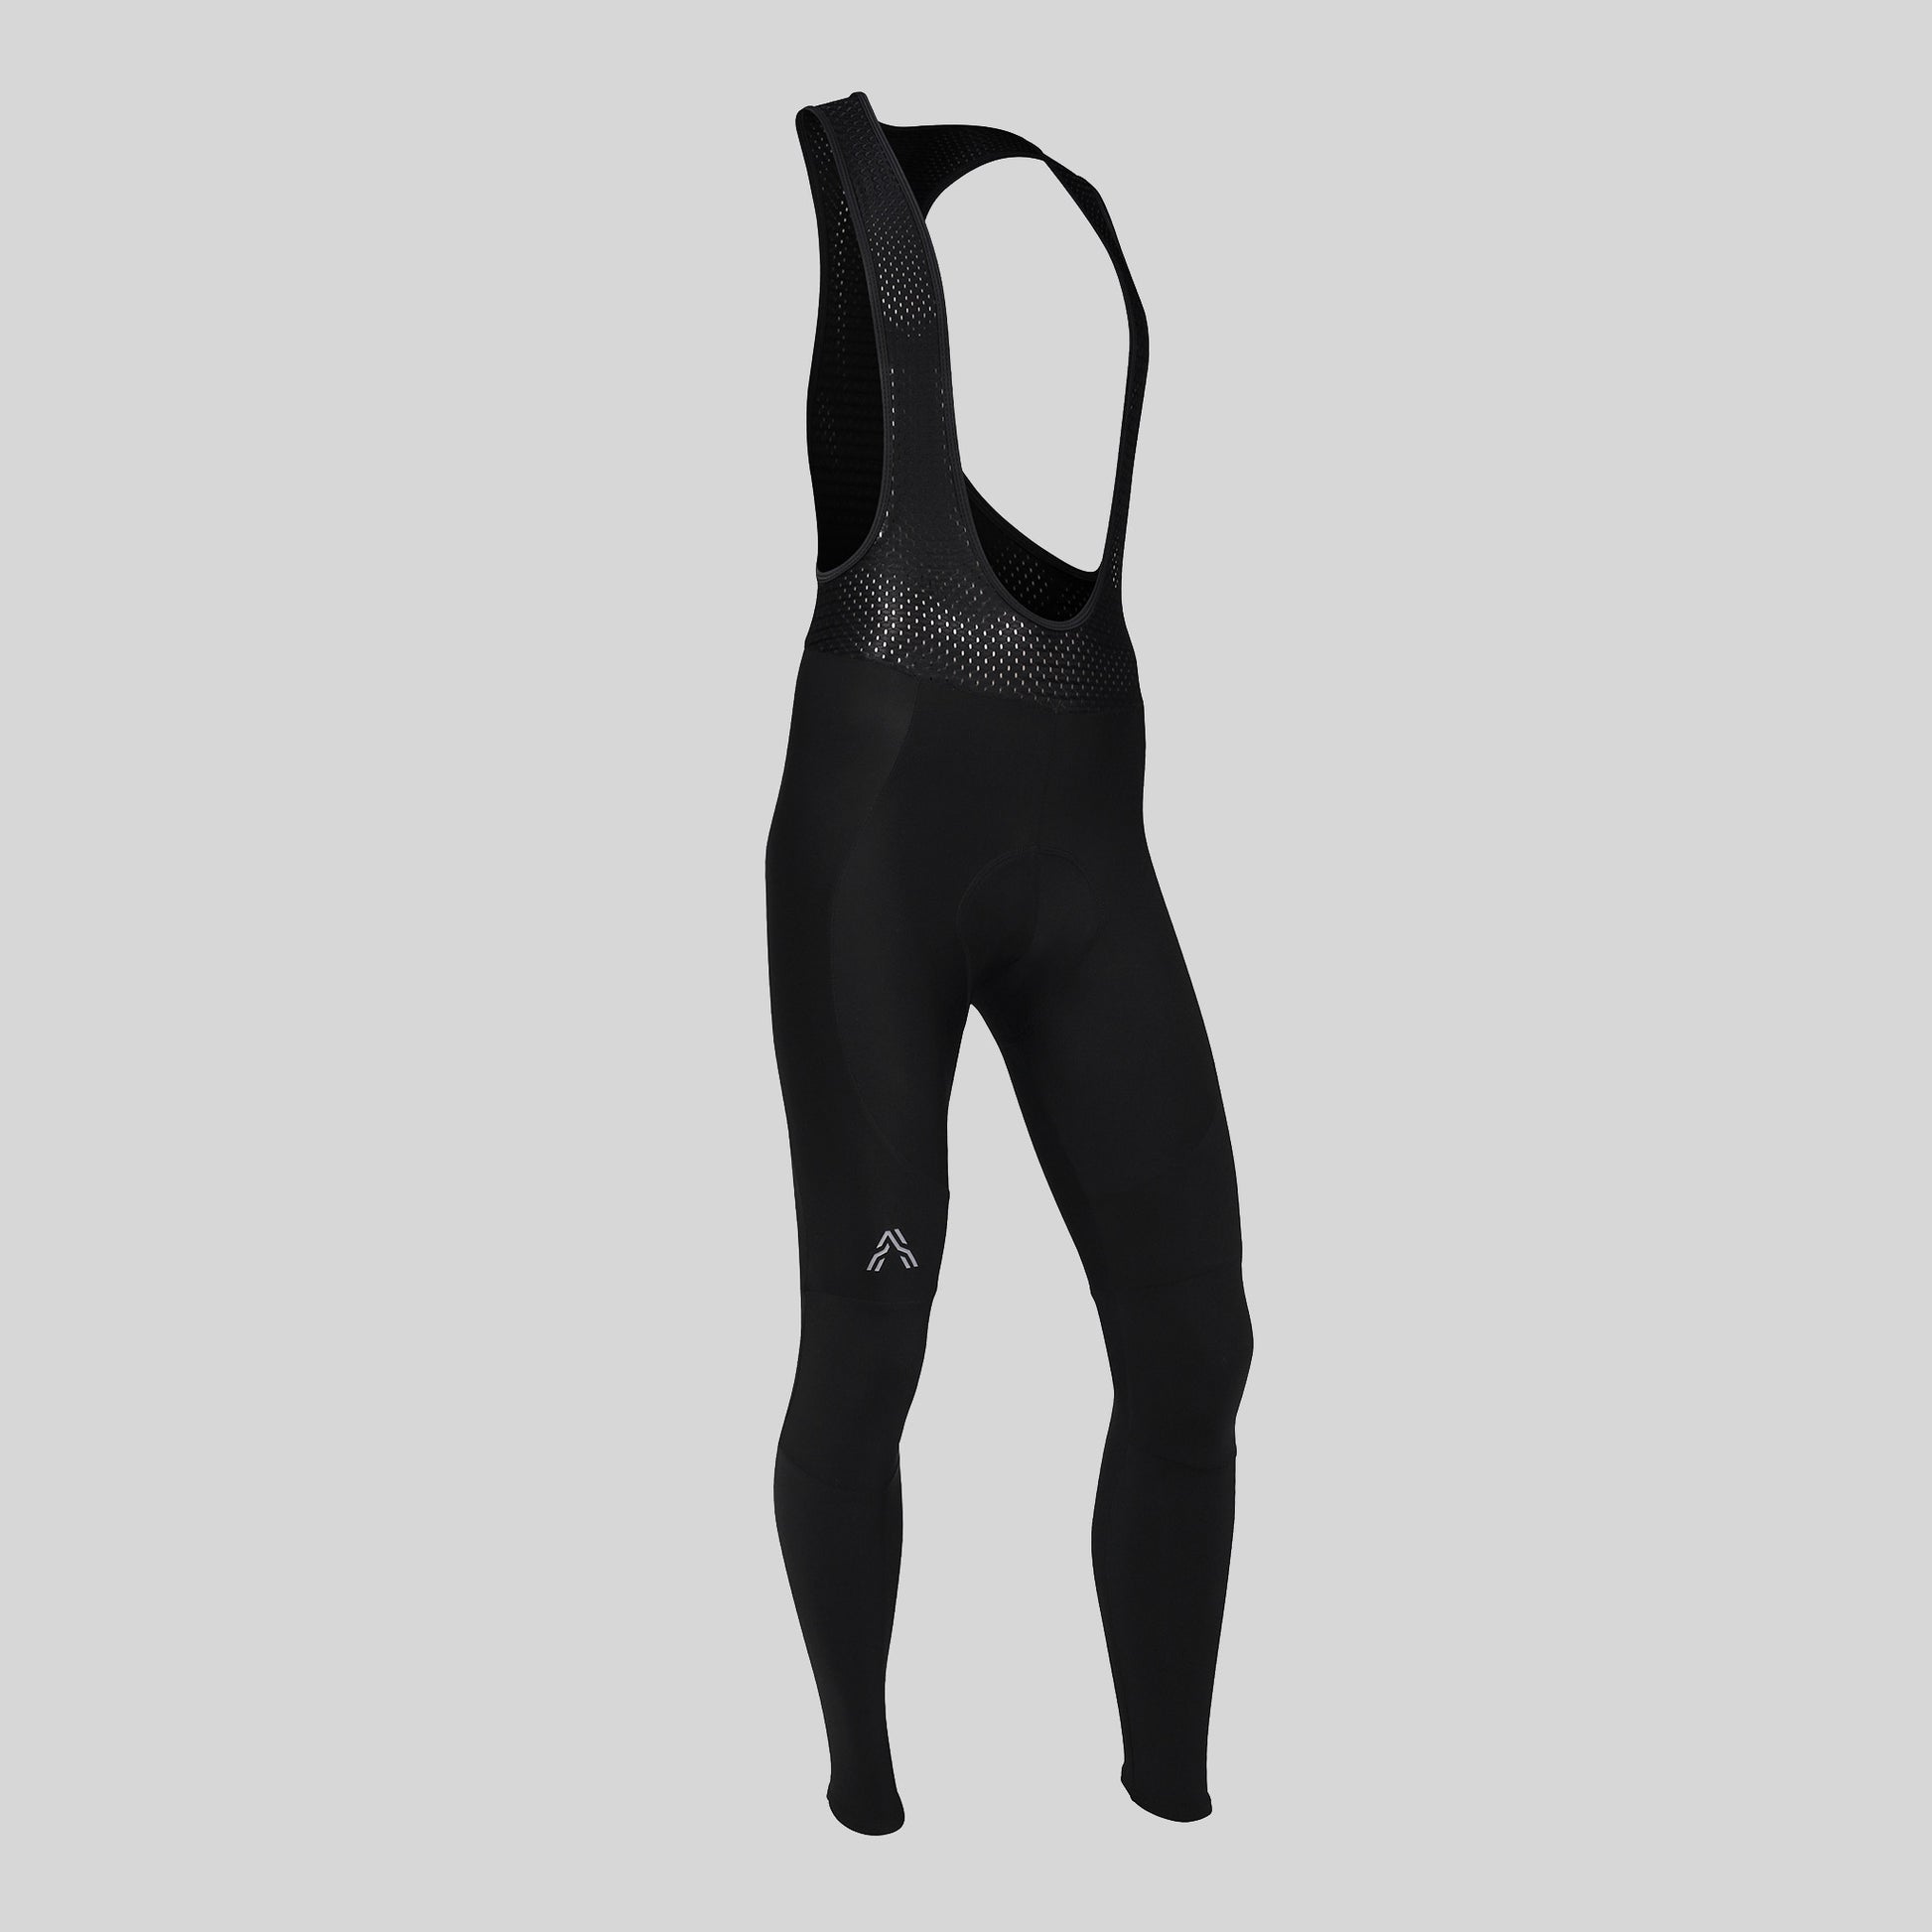 Men's Winter Thermal PRO Bib Tights Black from Ascender Cycling Club Switzerland Frontside with Reflective Logo View